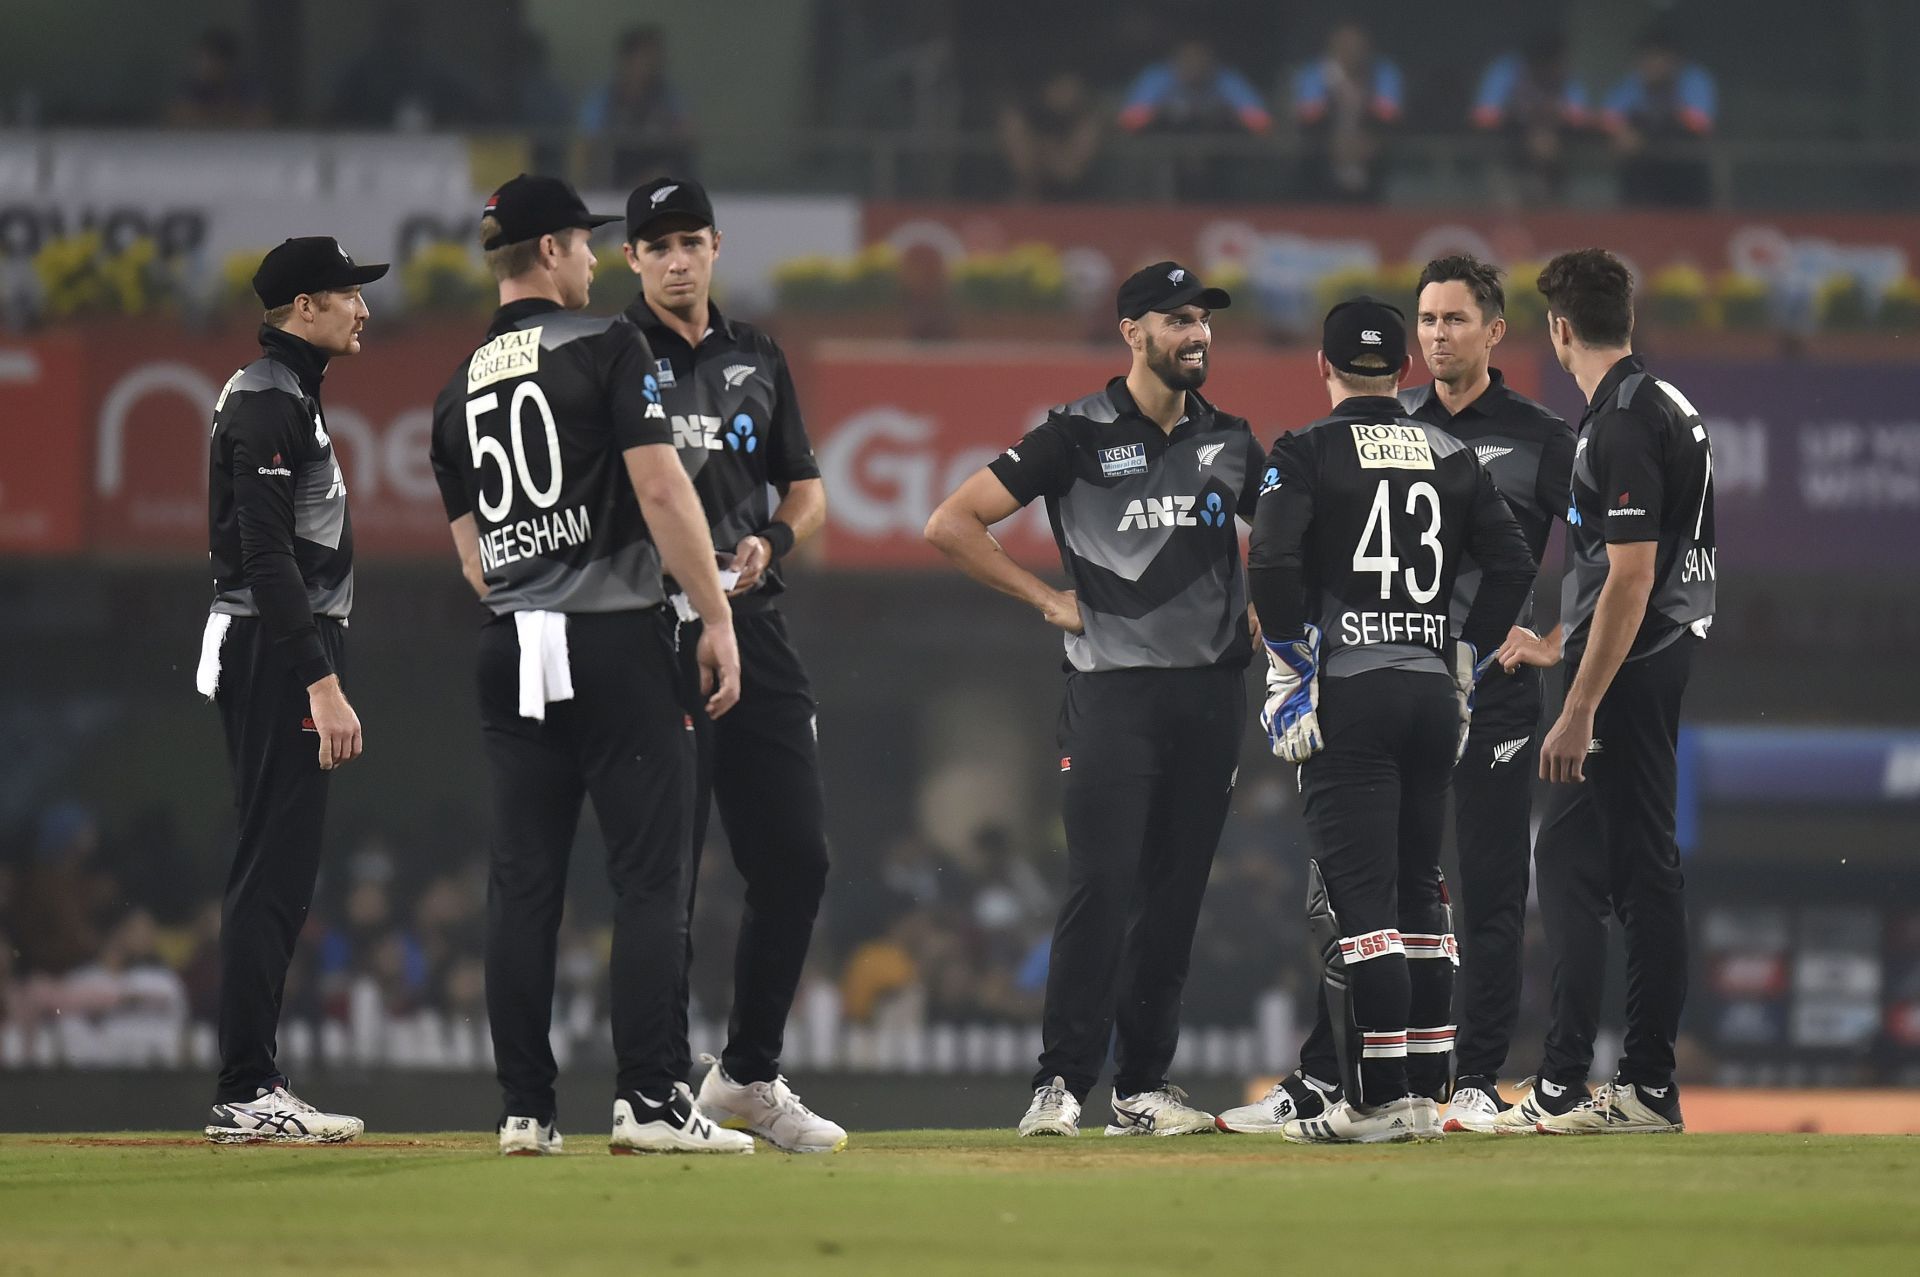 New Zealand cricket team. Pic: Getty Images